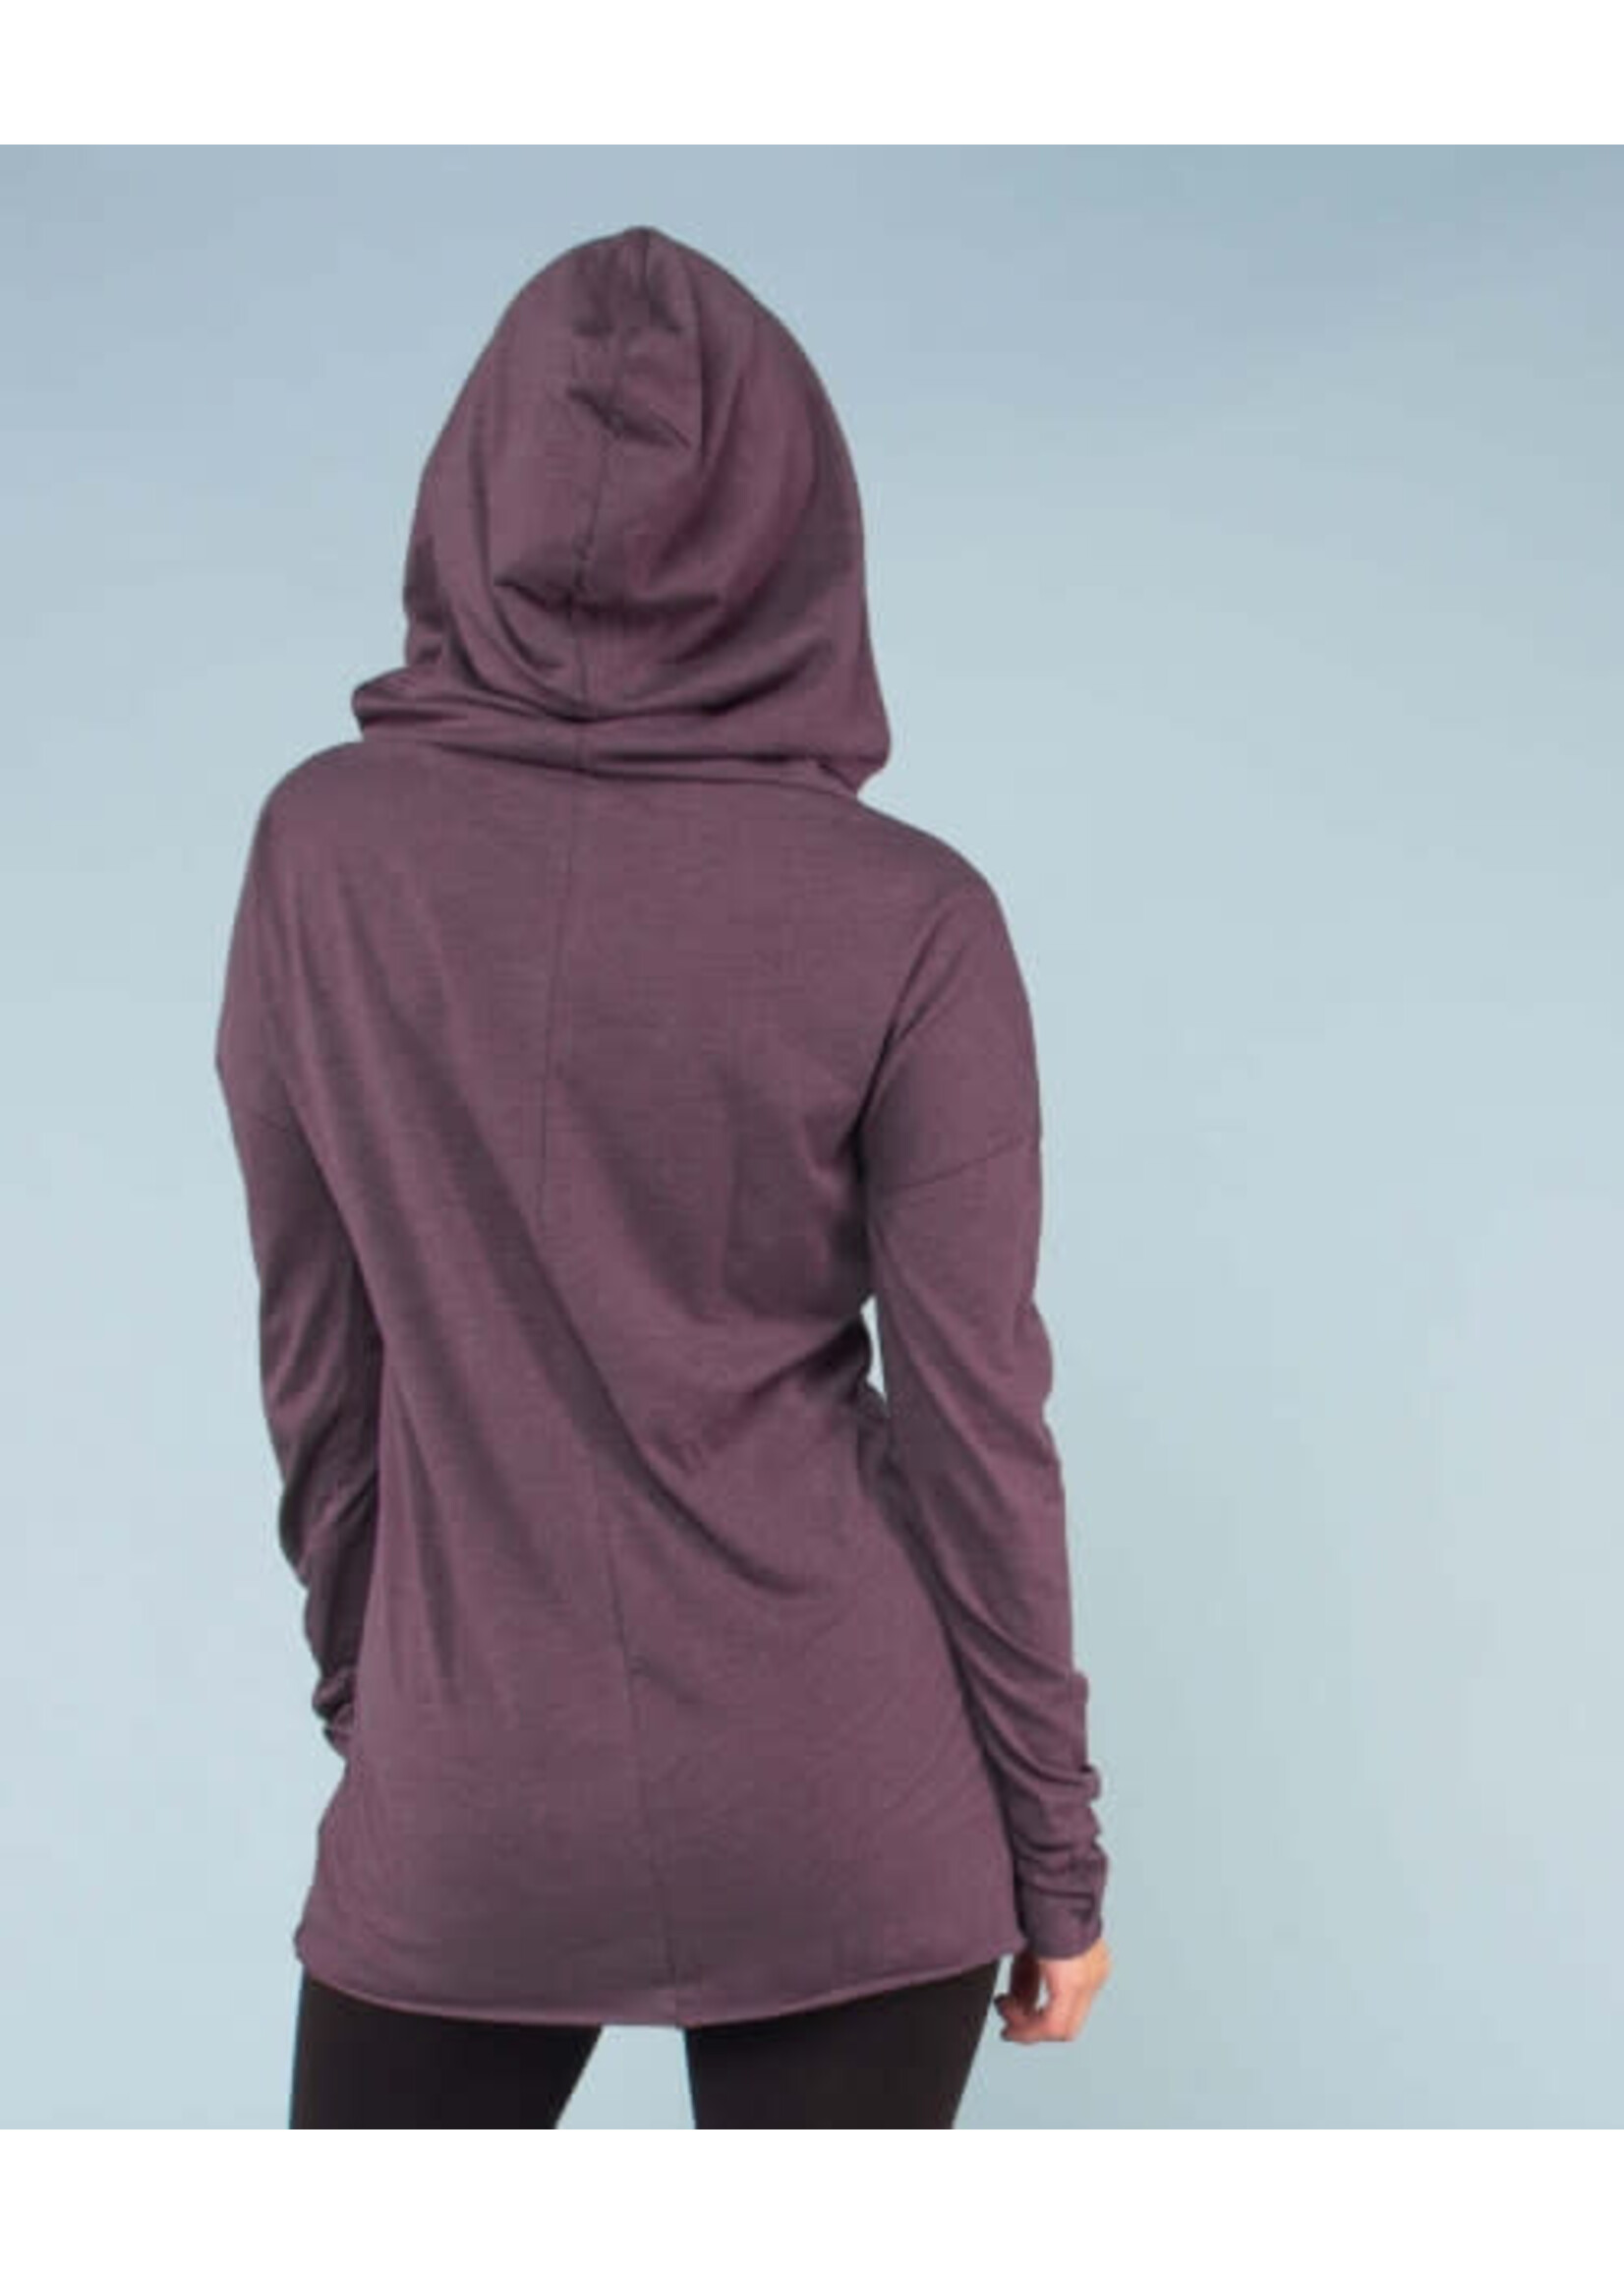 Soul Flower The Resistance Cowl Neck Hoody